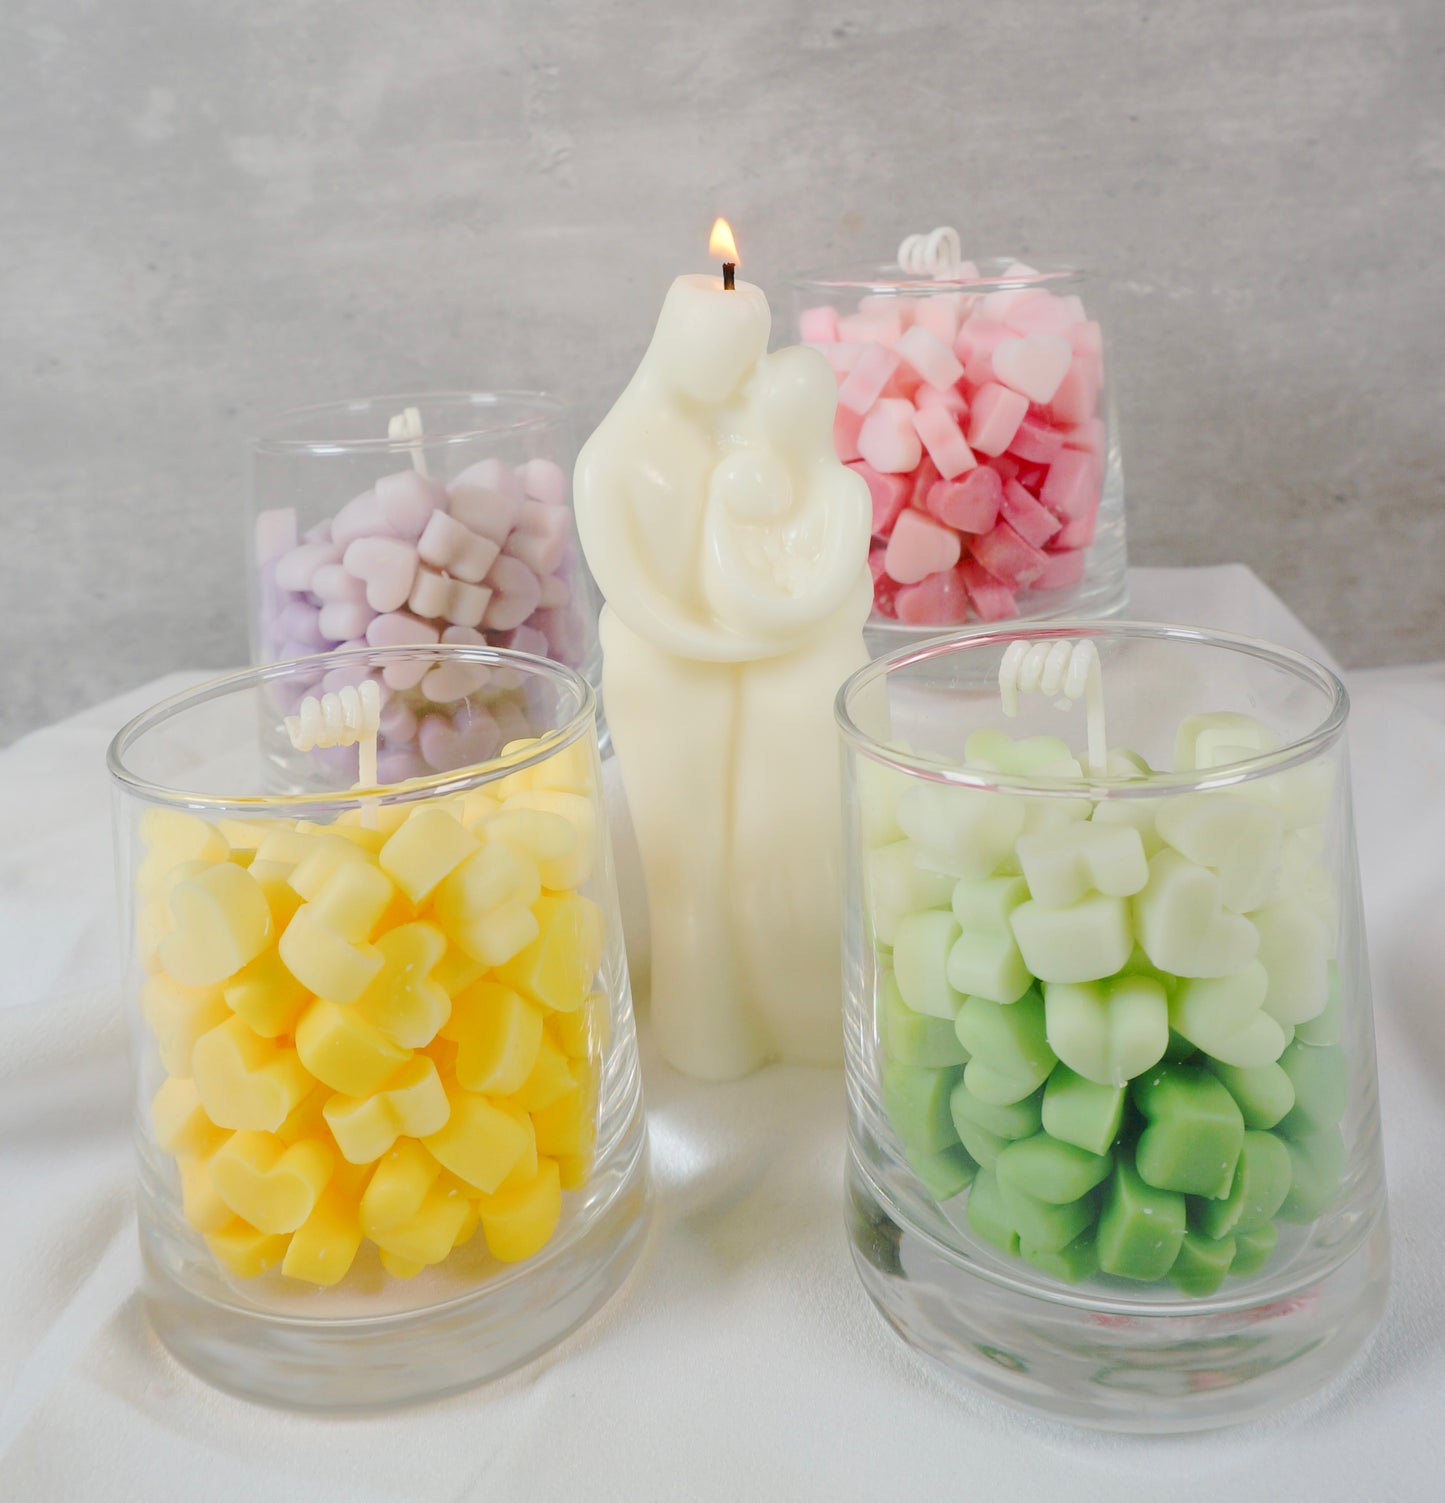 Hearts candle | Candy Hearts Candle| Conversation Hearts candle| Love candle| Valentines day candle | soy candle | gifts